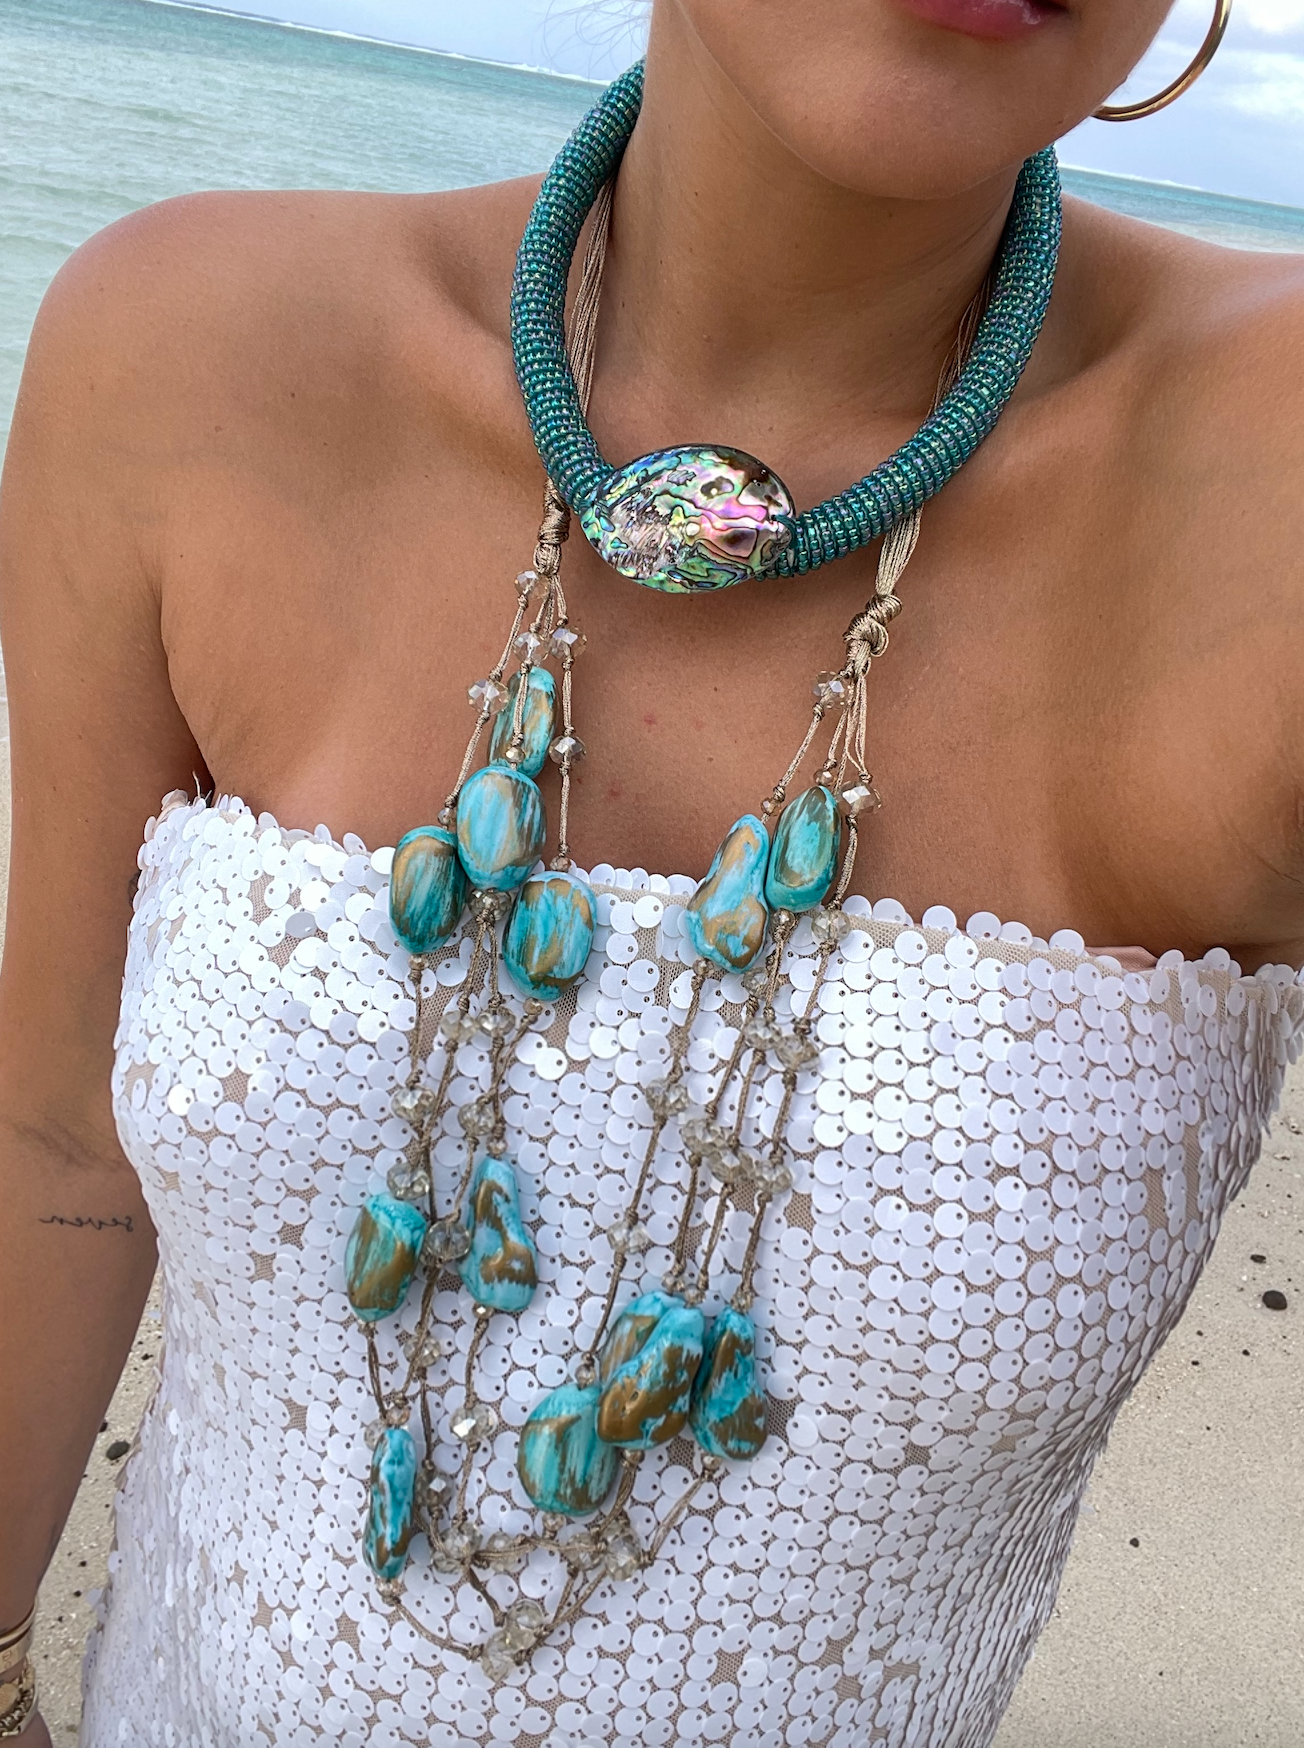 The Iridescent Turquoise Dreams Abalone Necklace